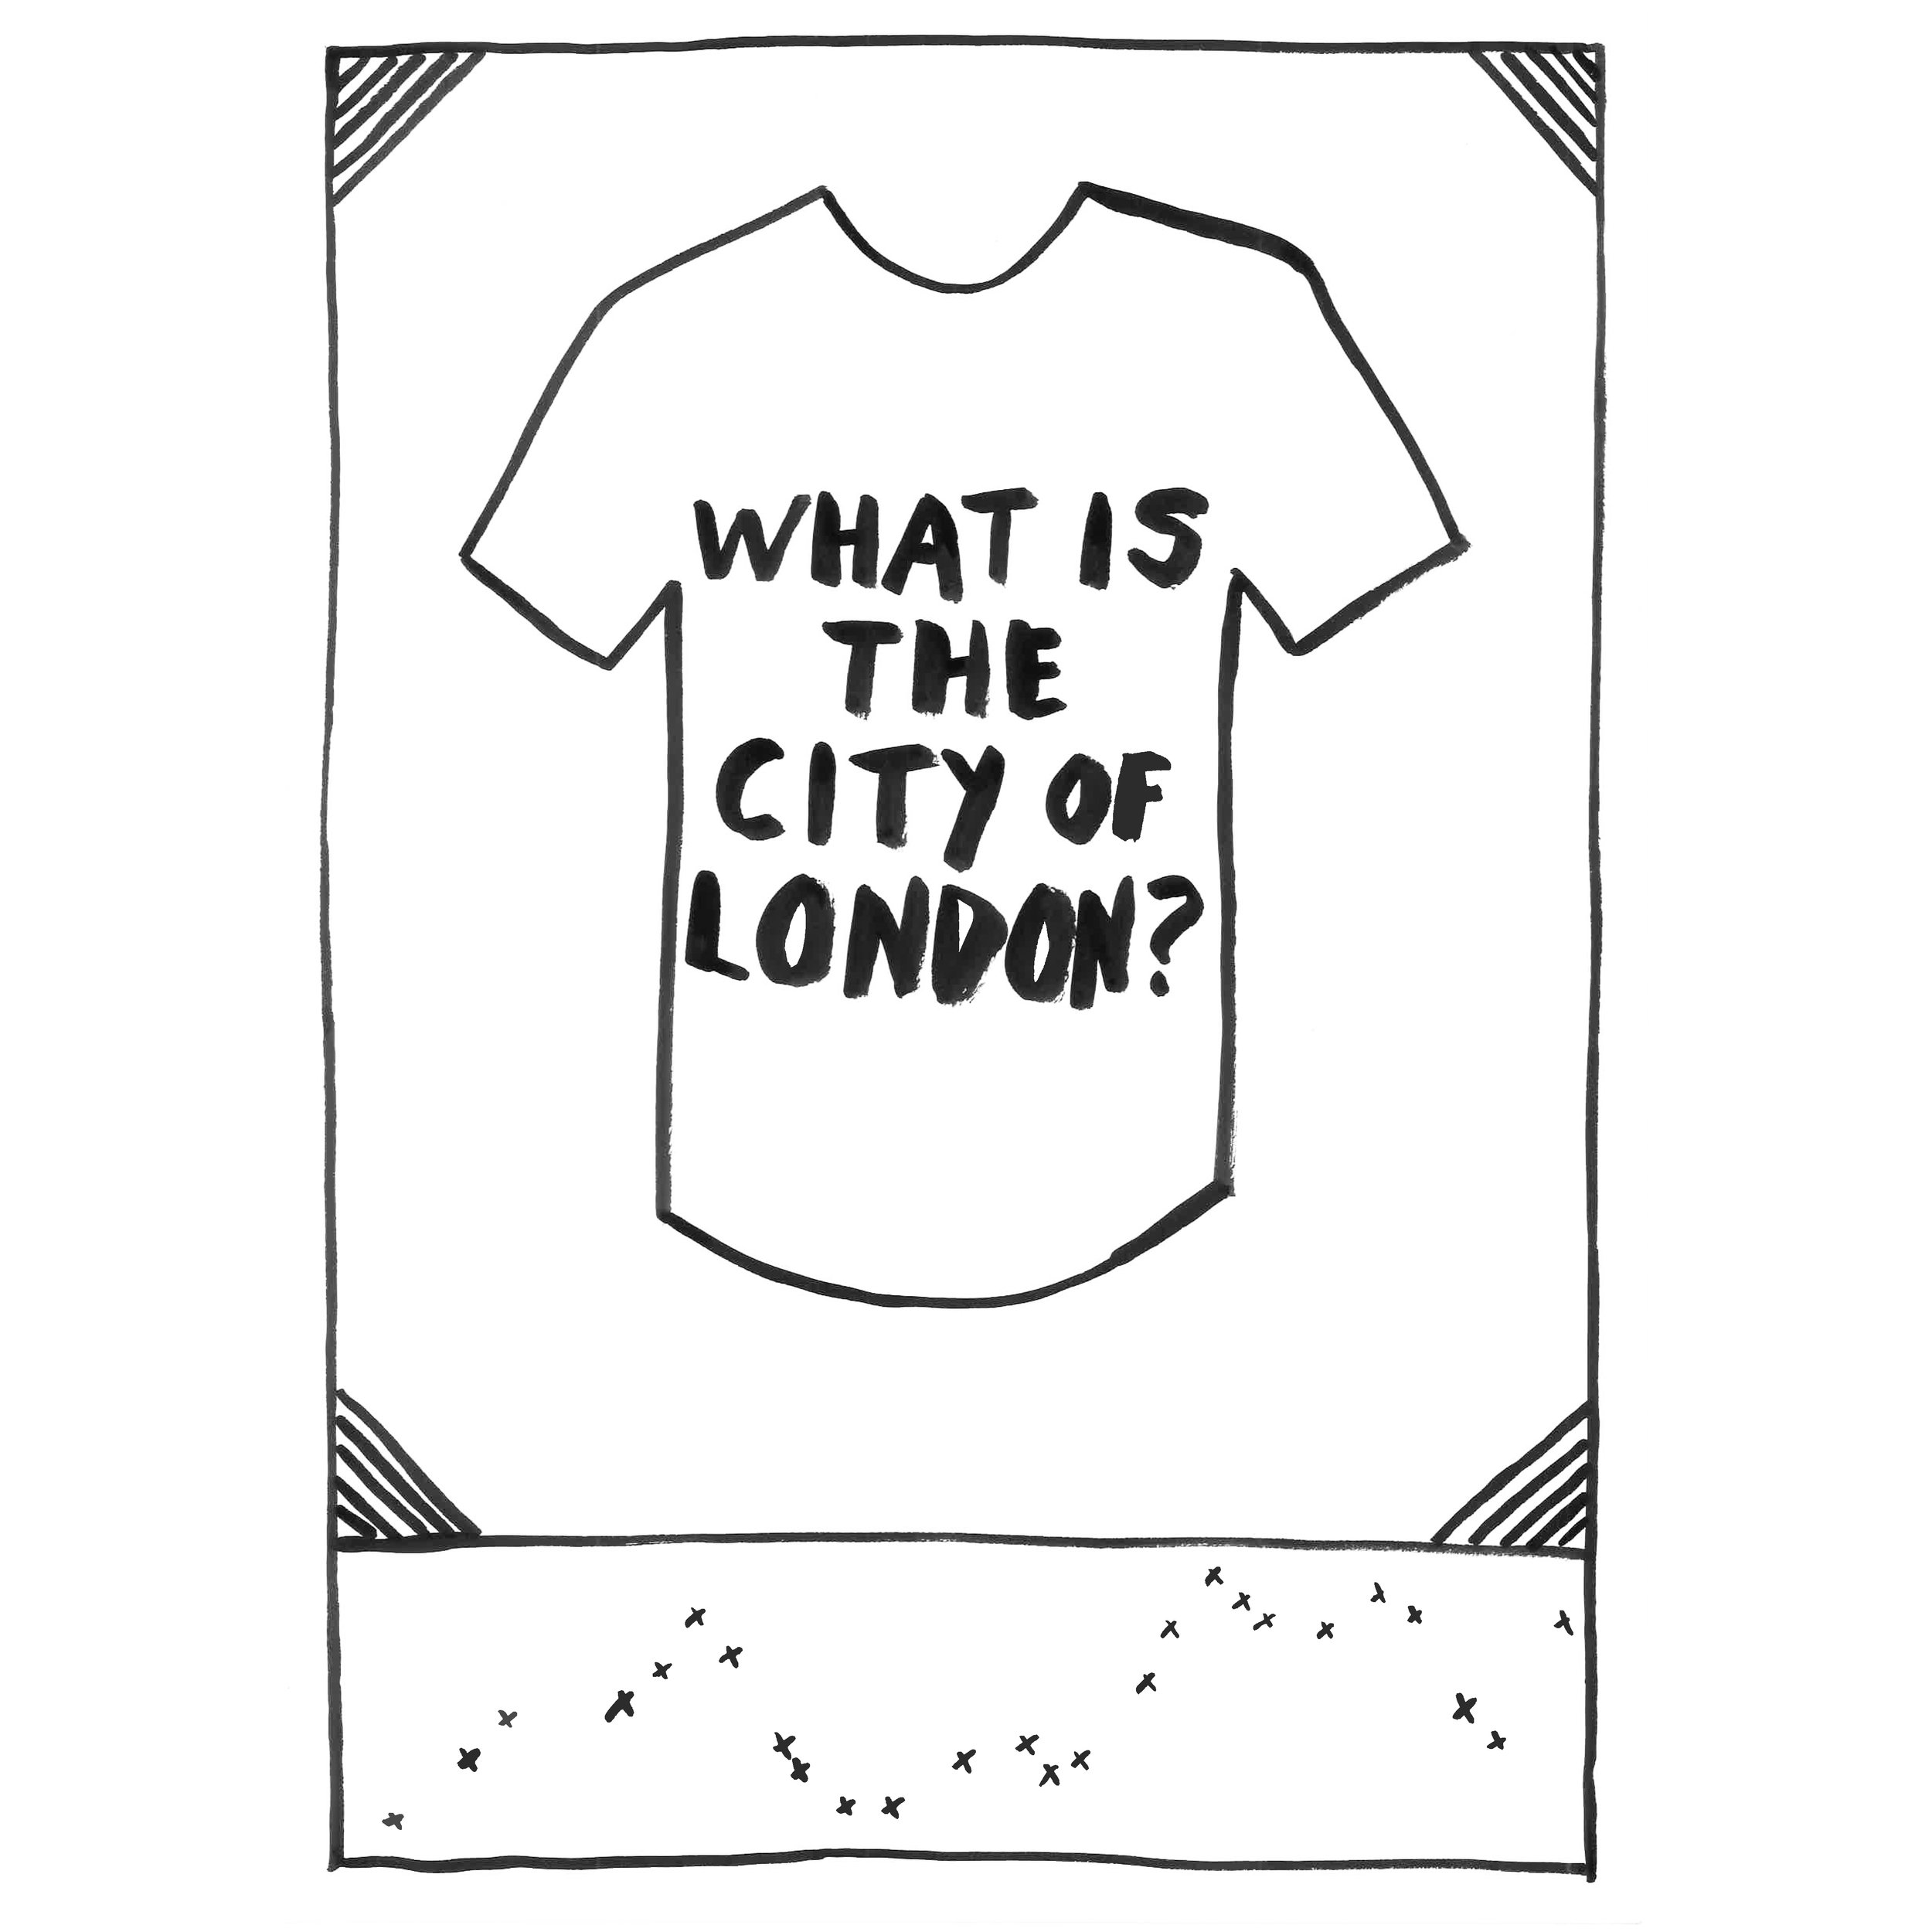 What Is the City of London.jpg